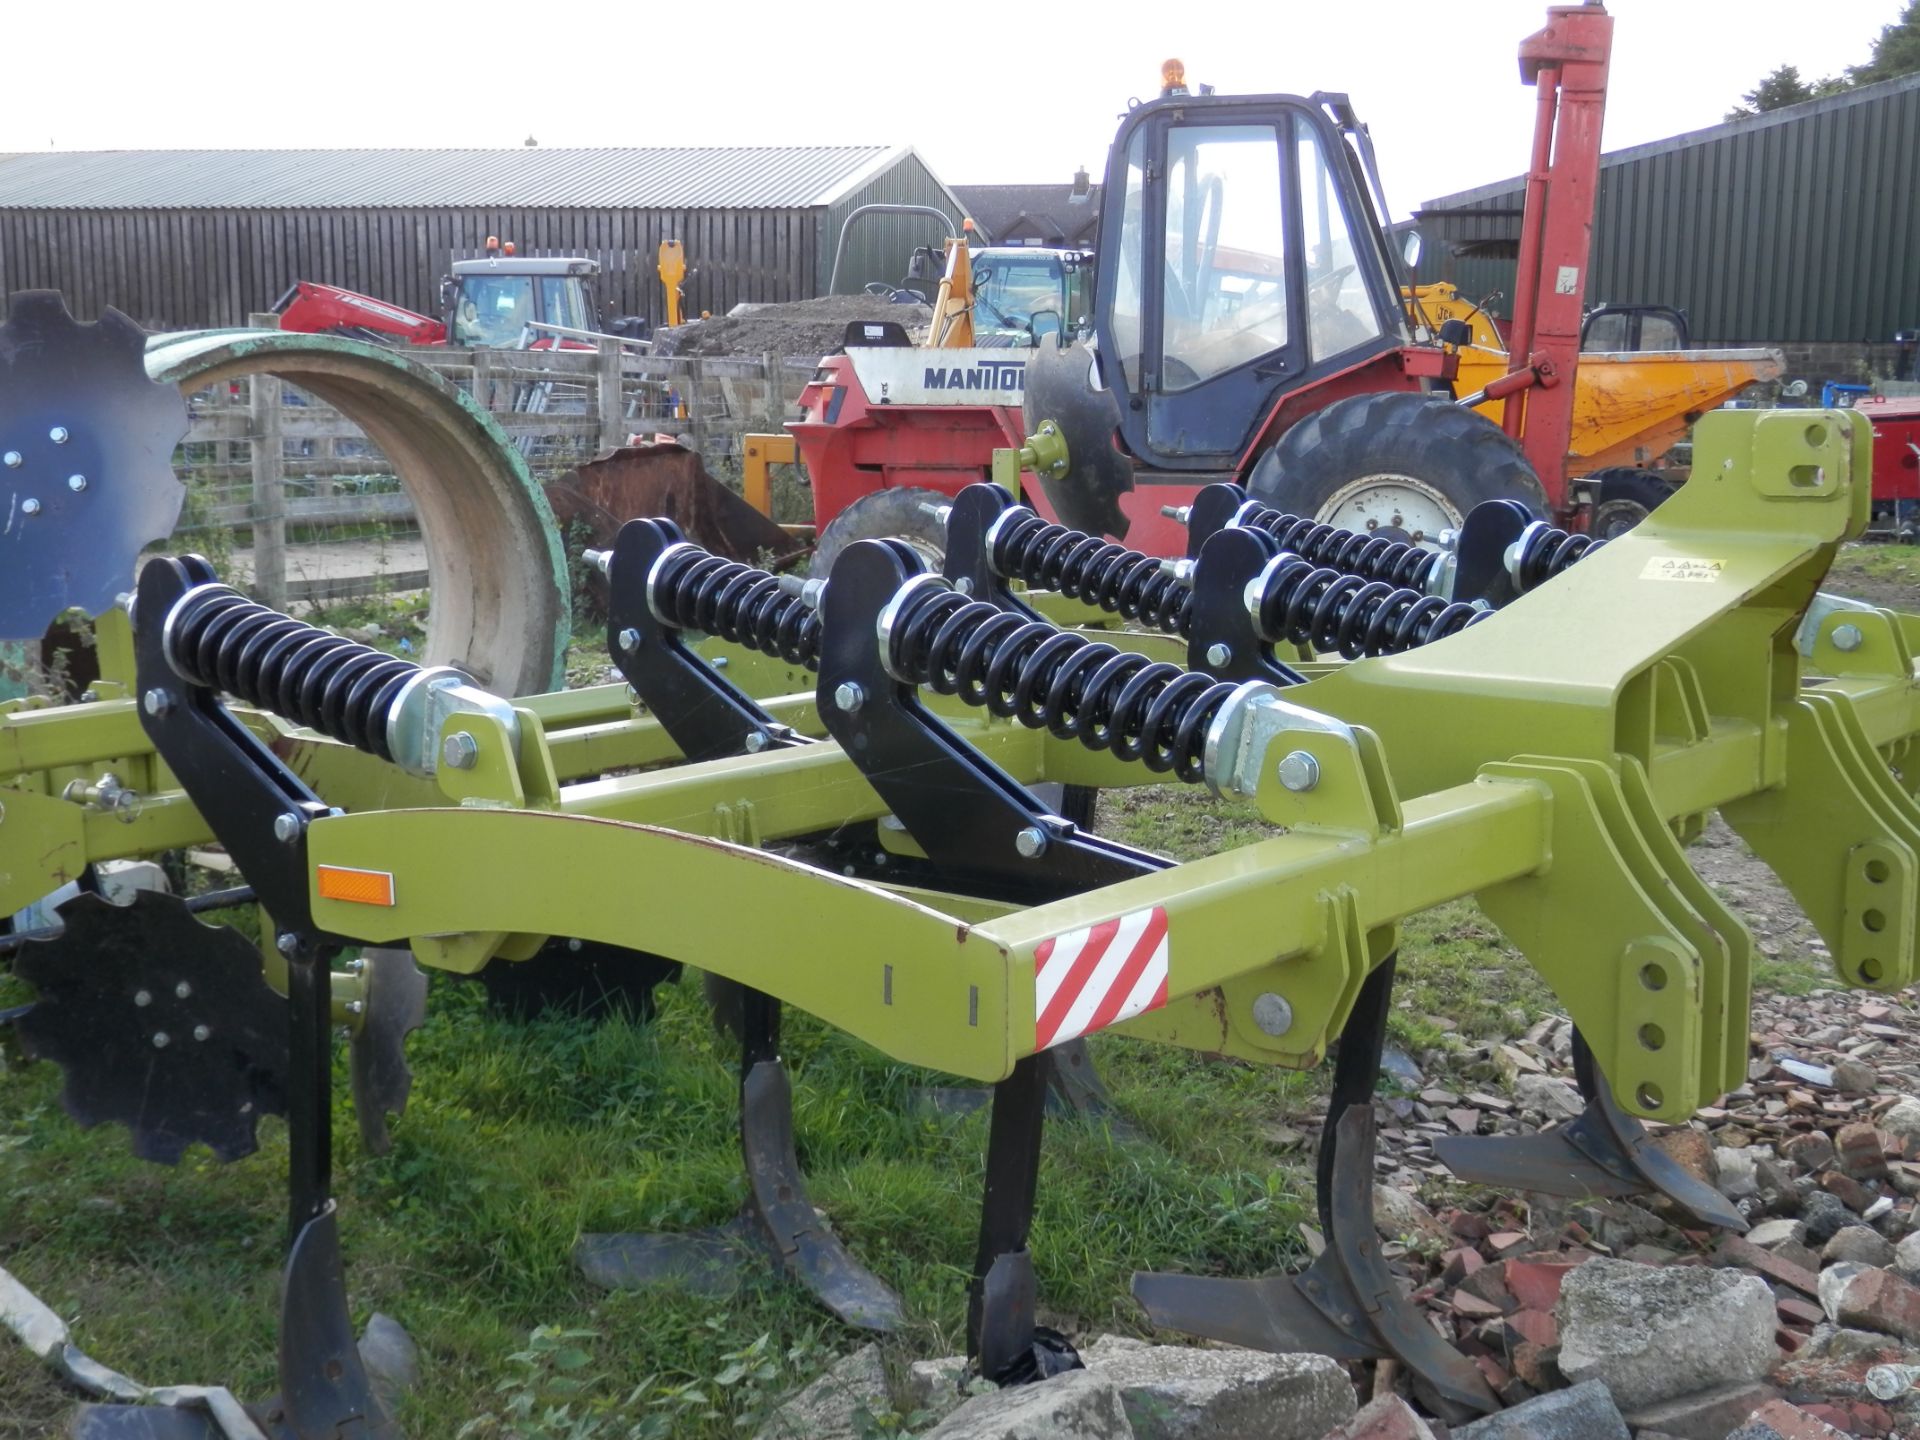 2014 UNUSED/NEW TERESA ASG-30 MINIMUM CULTIVATION TRACTOR ATTACHMENT (LEMKIN PARTS) POLISH MADE. - Image 2 of 7